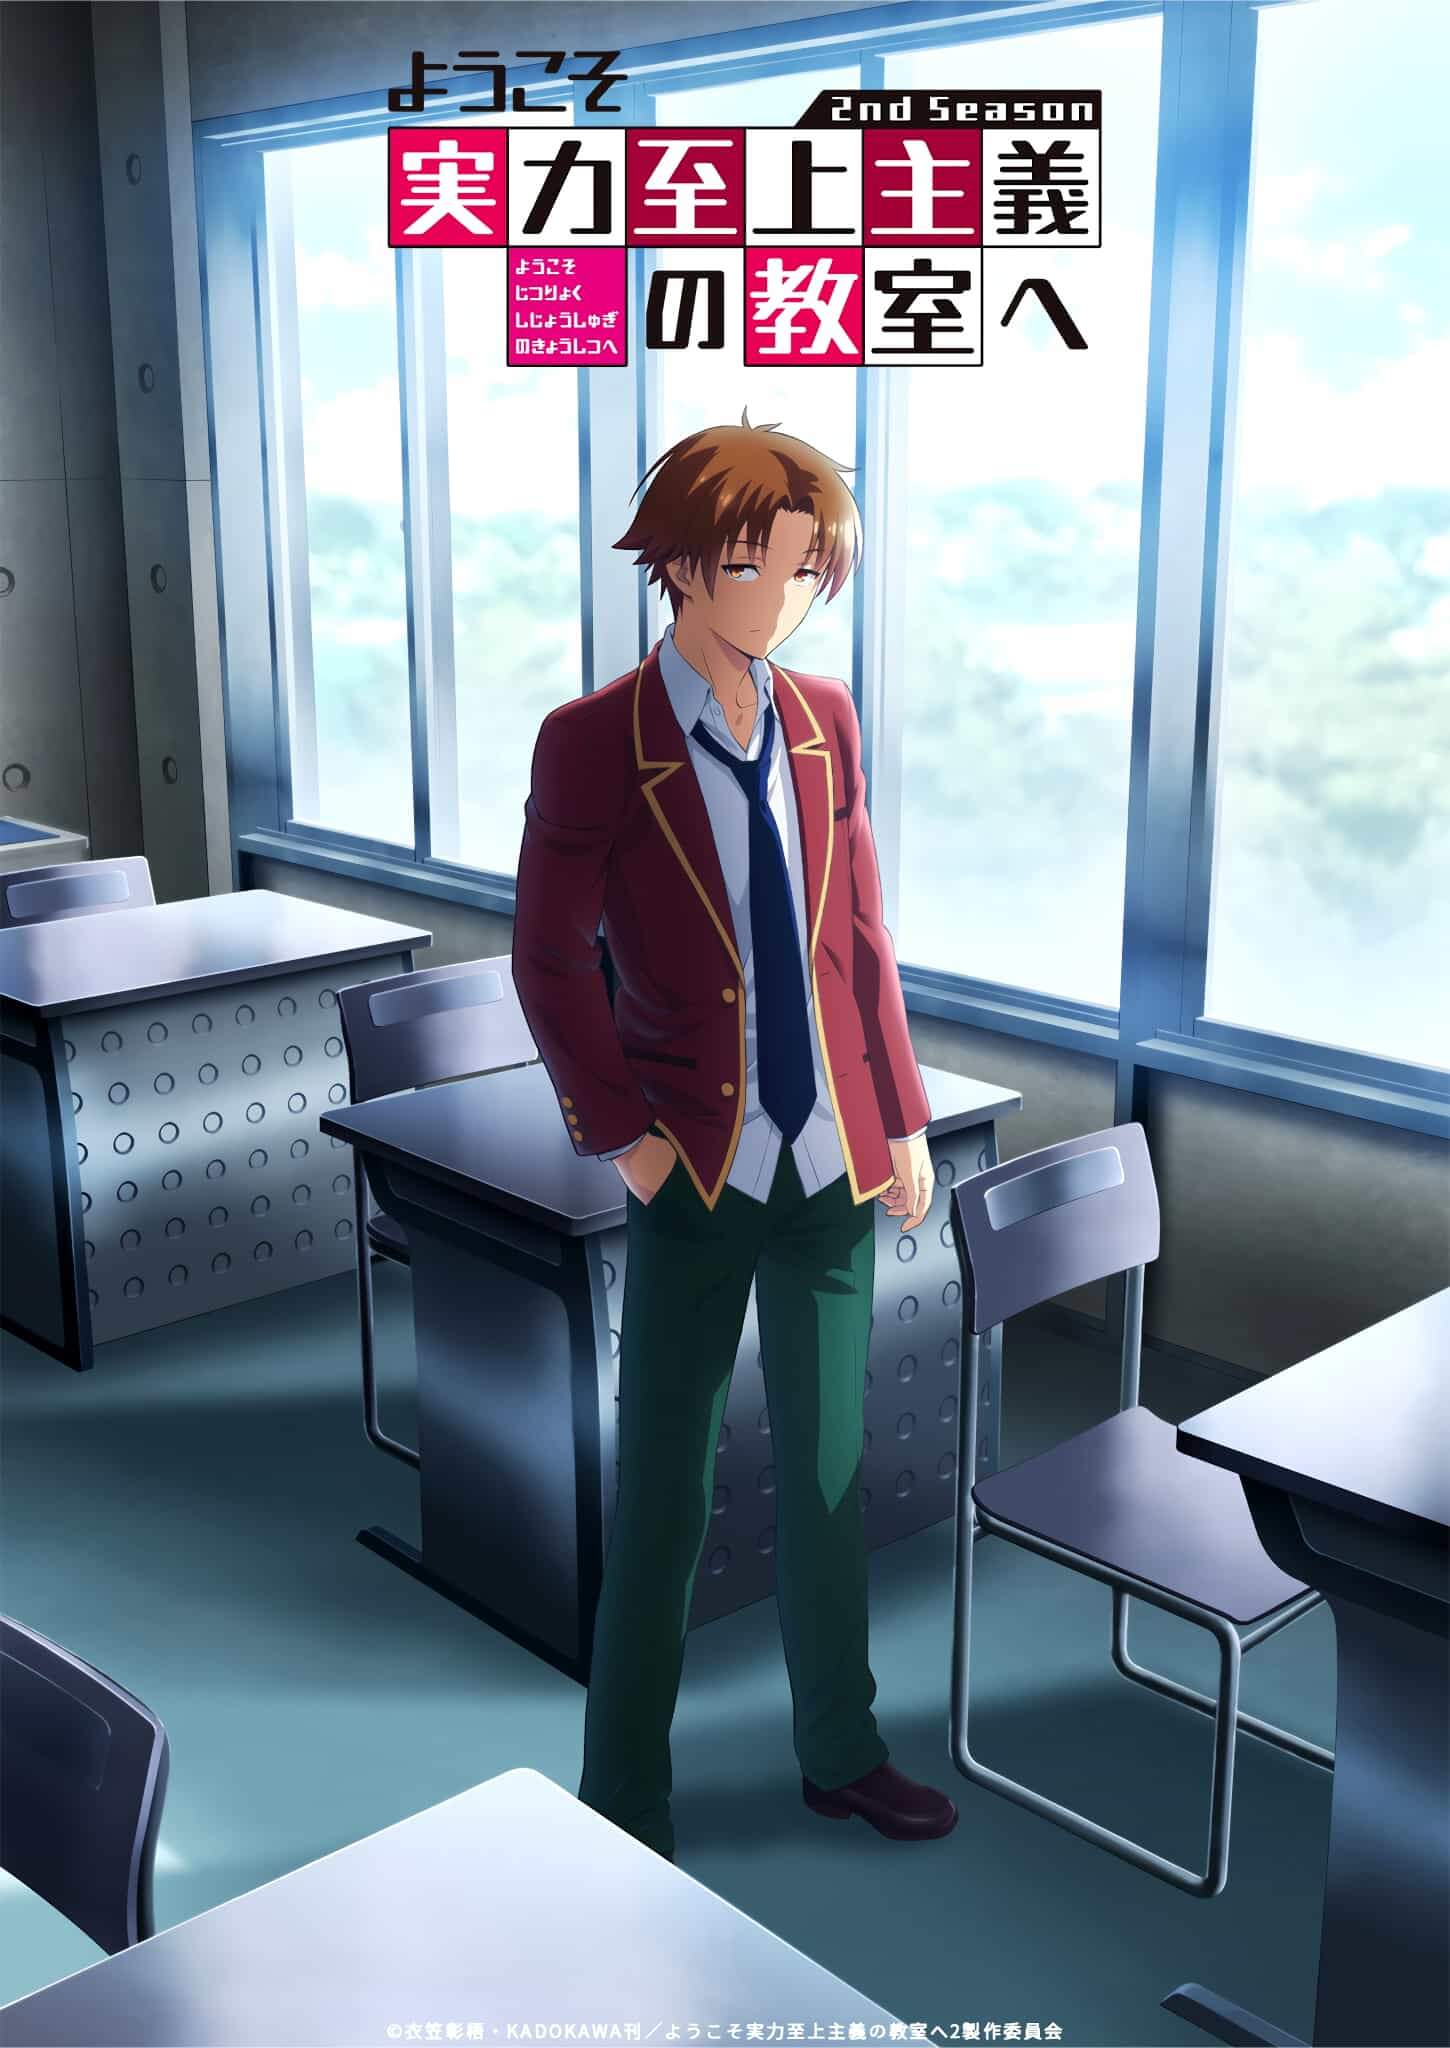 Classroom of the Elite Season 2 and 3 Confirmed Teaser Visual